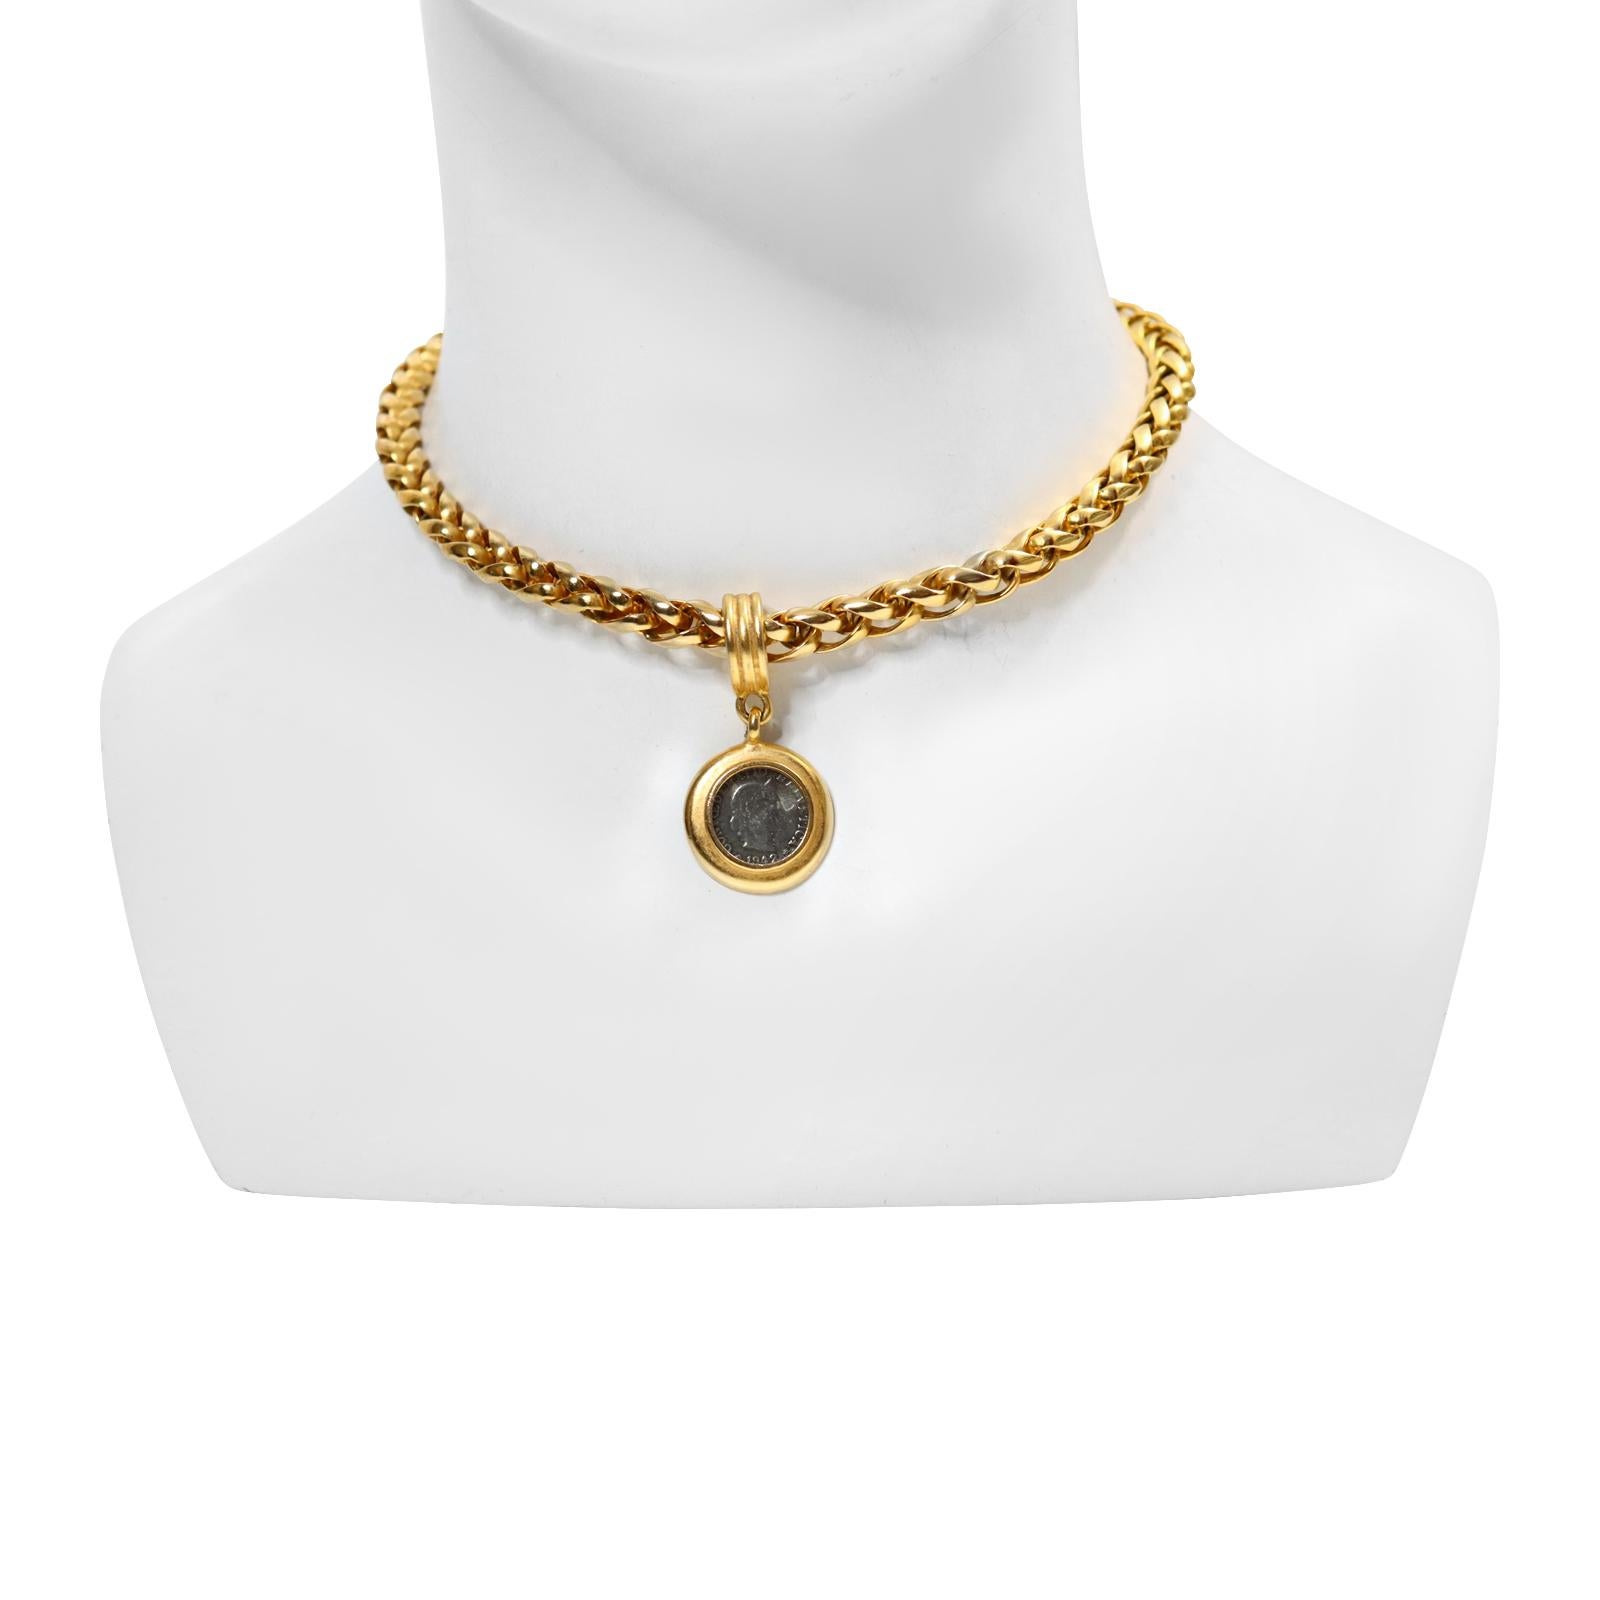 Vintage Carolee Gold Chain and Dangling Coin Necklace, circa 1990s In Good Condition For Sale In New York, NY